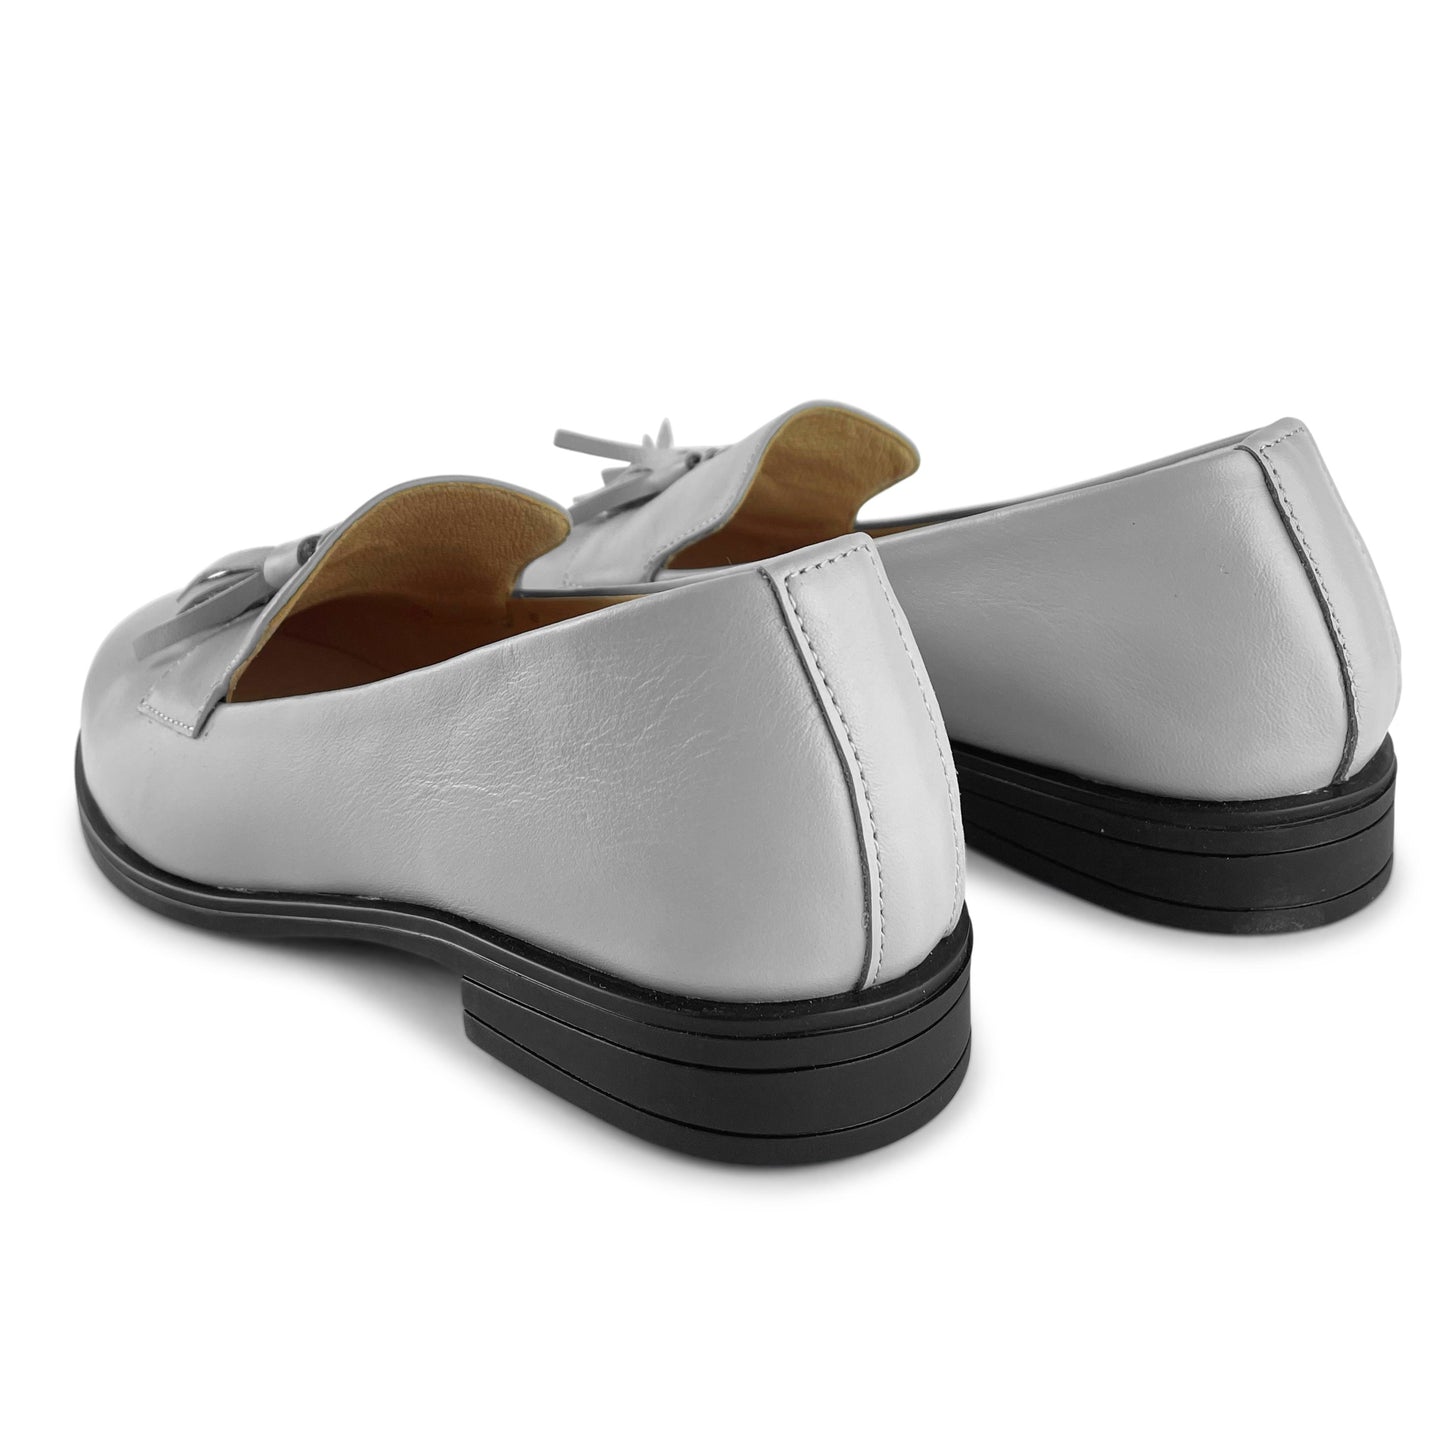 Women's Leather Loafer Shoes Slipper Style